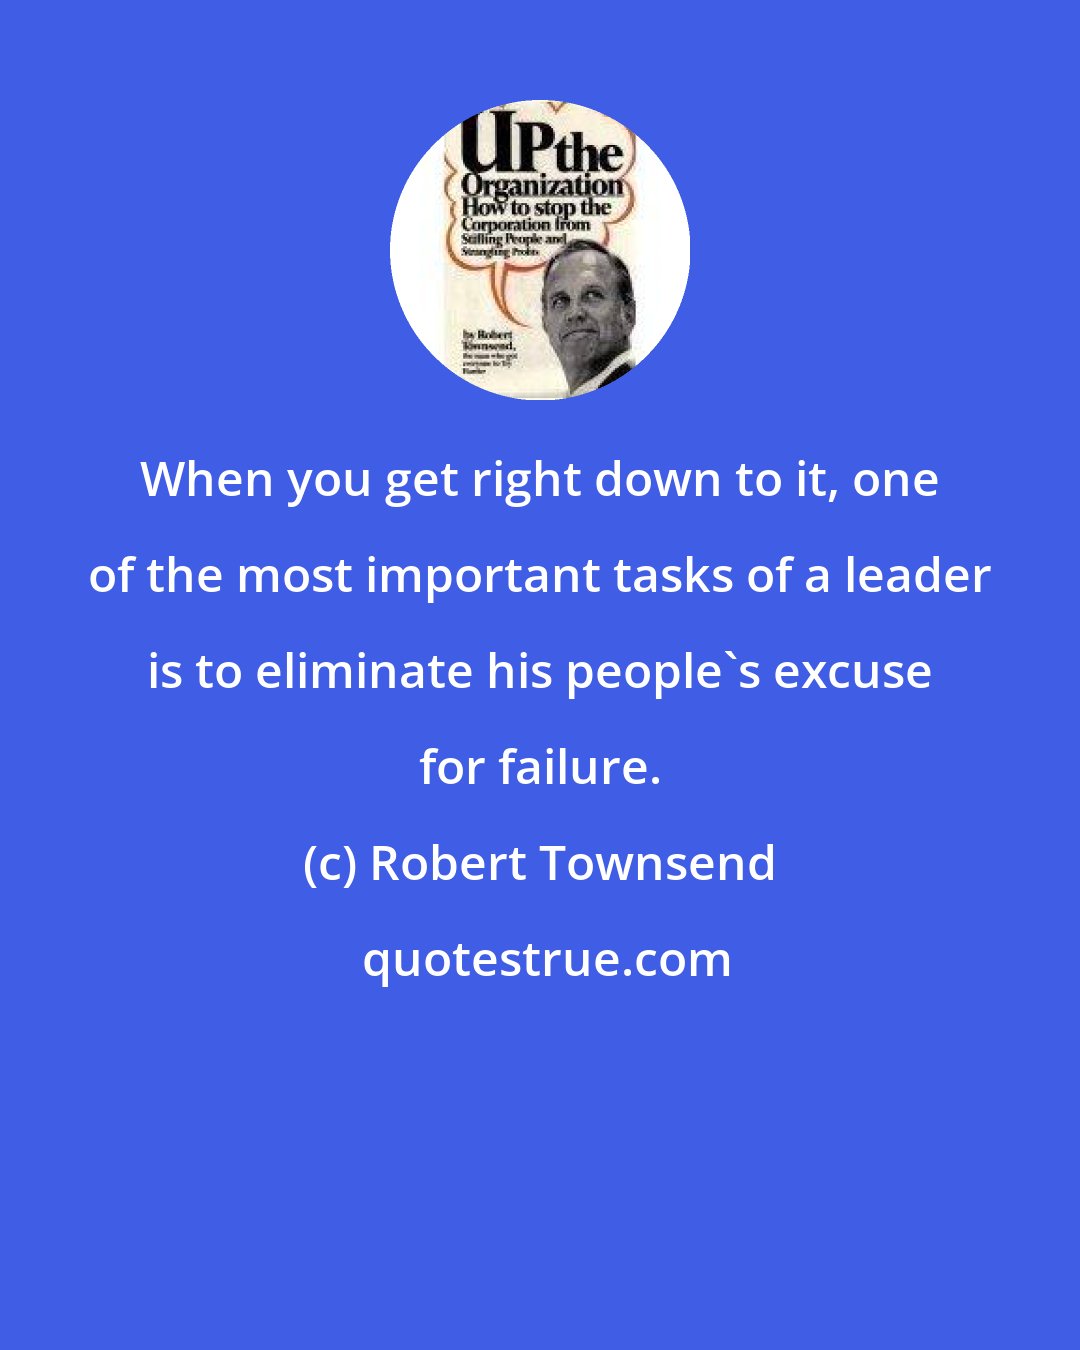 Robert Townsend: When you get right down to it, one of the most important tasks of a leader is to eliminate his people's excuse for failure.